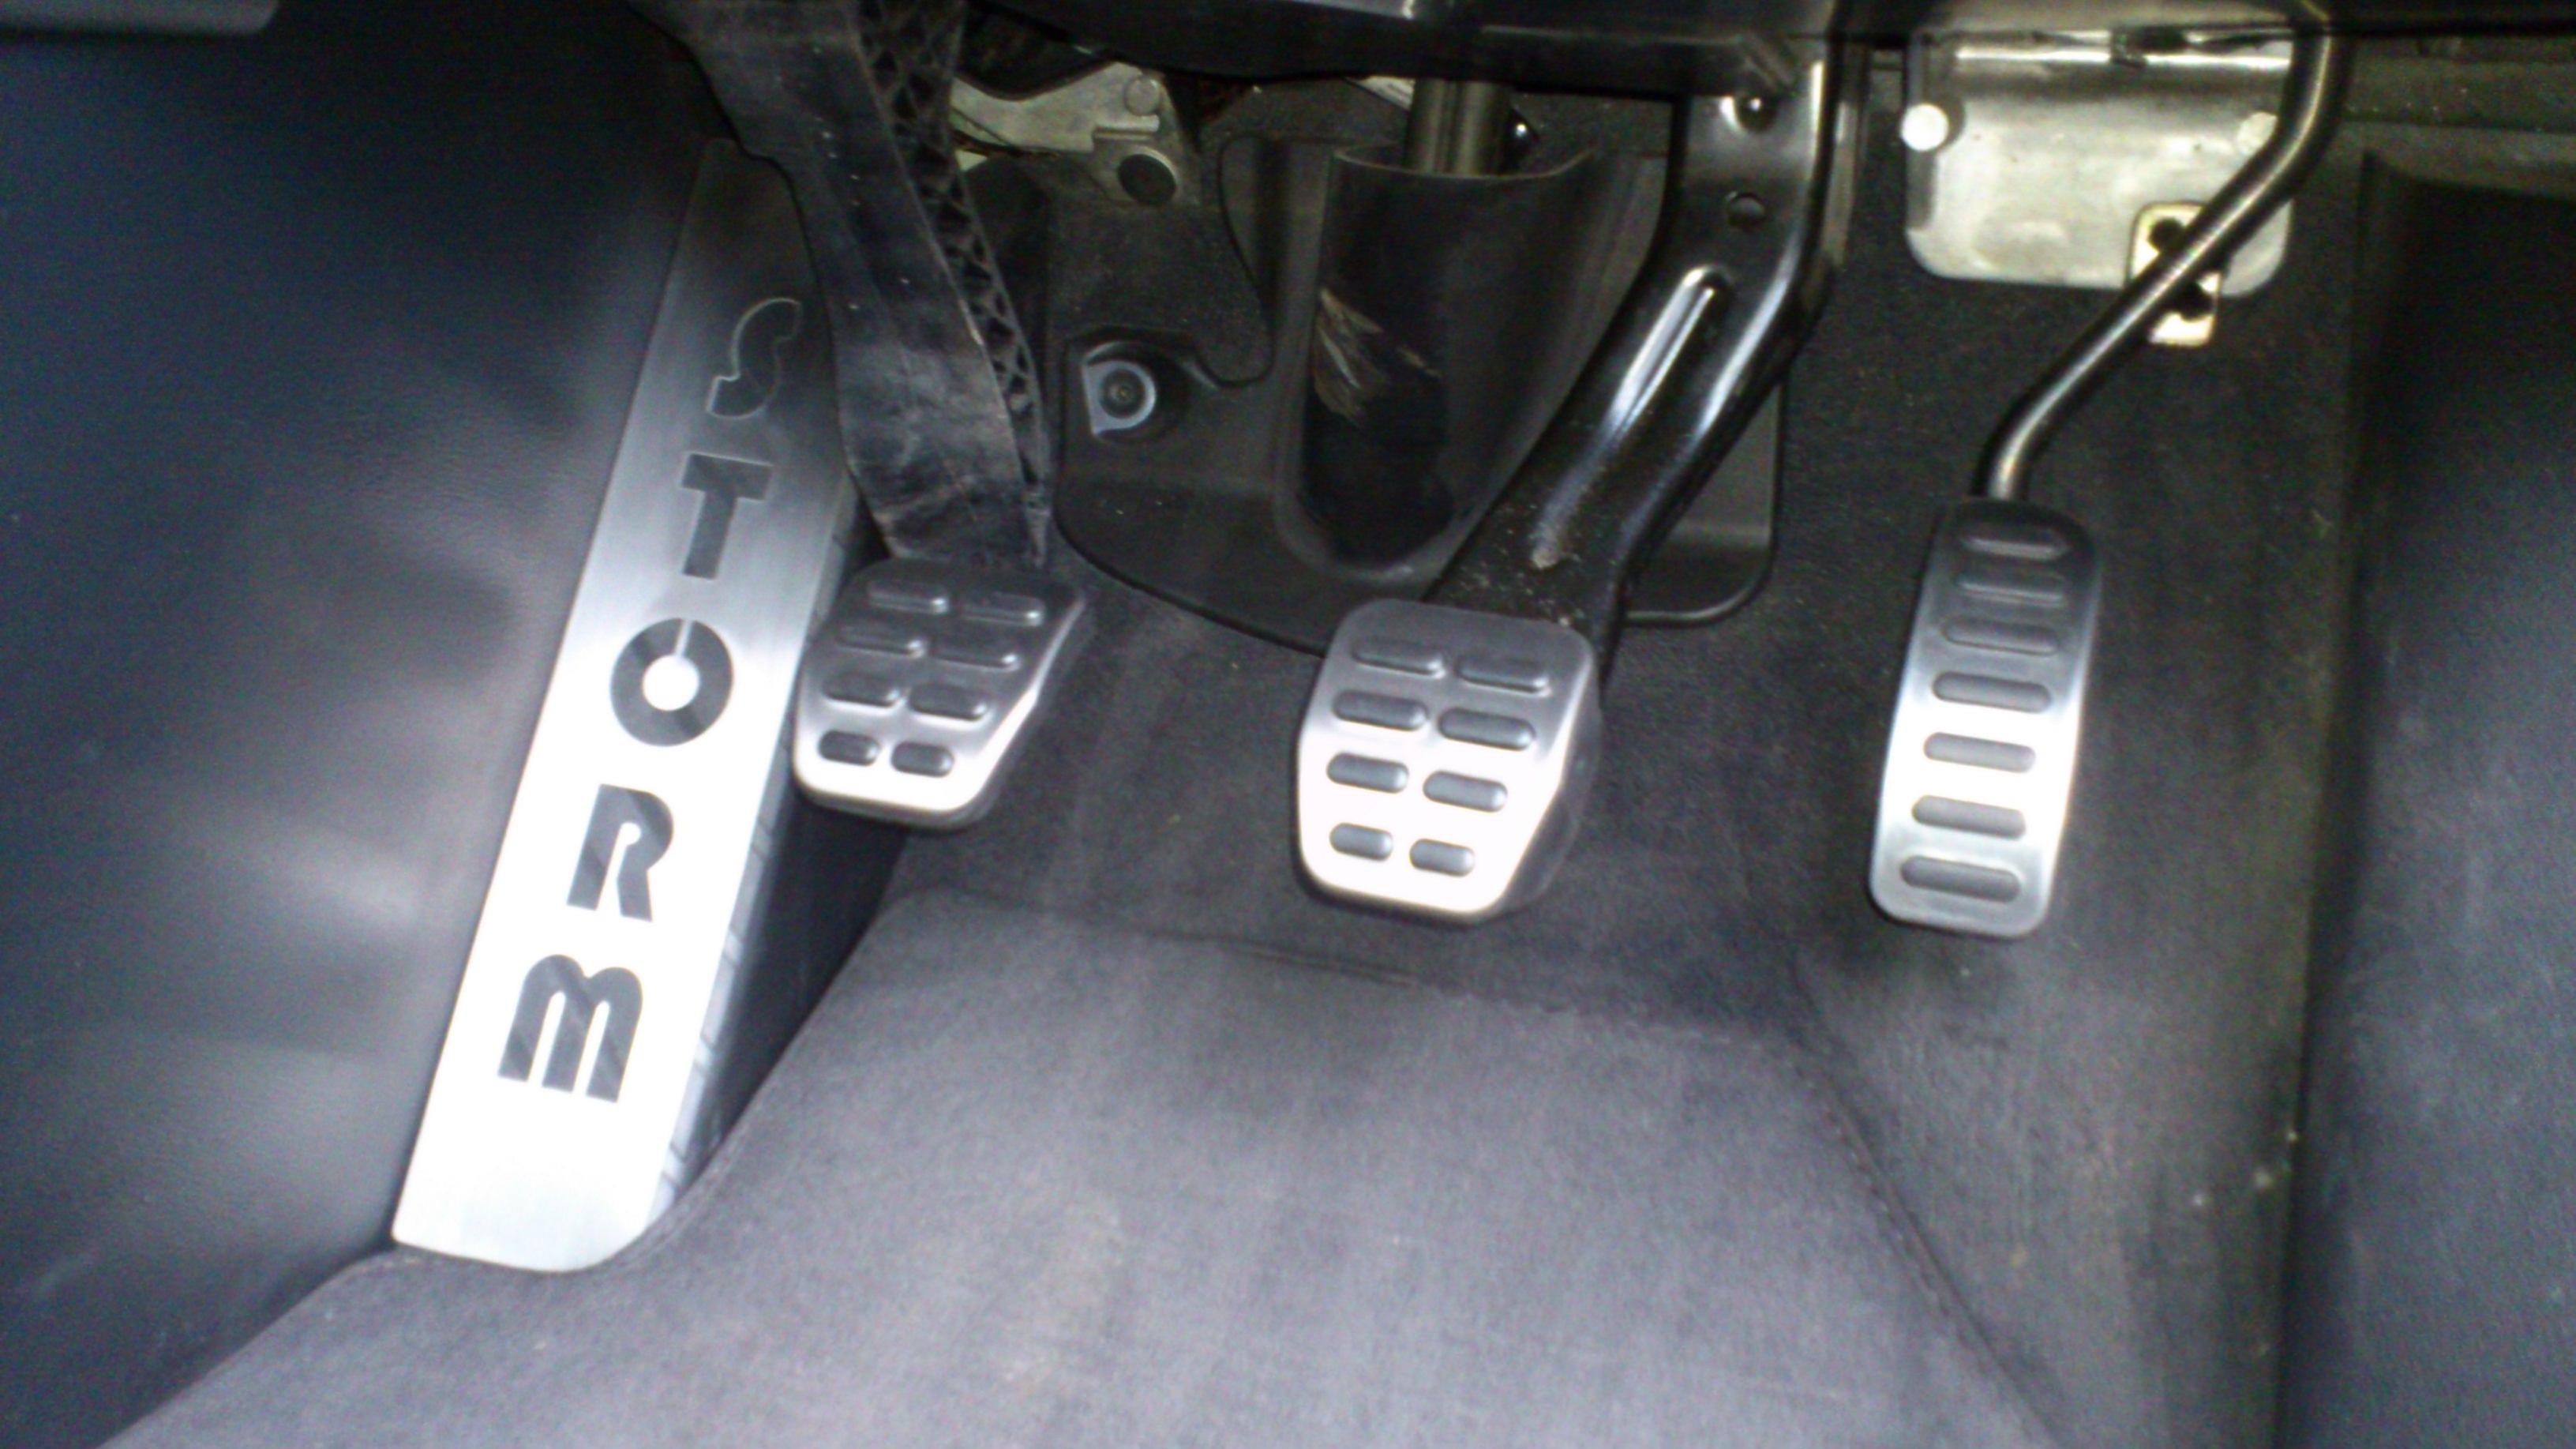 TT Pedals and Sumo Footrest